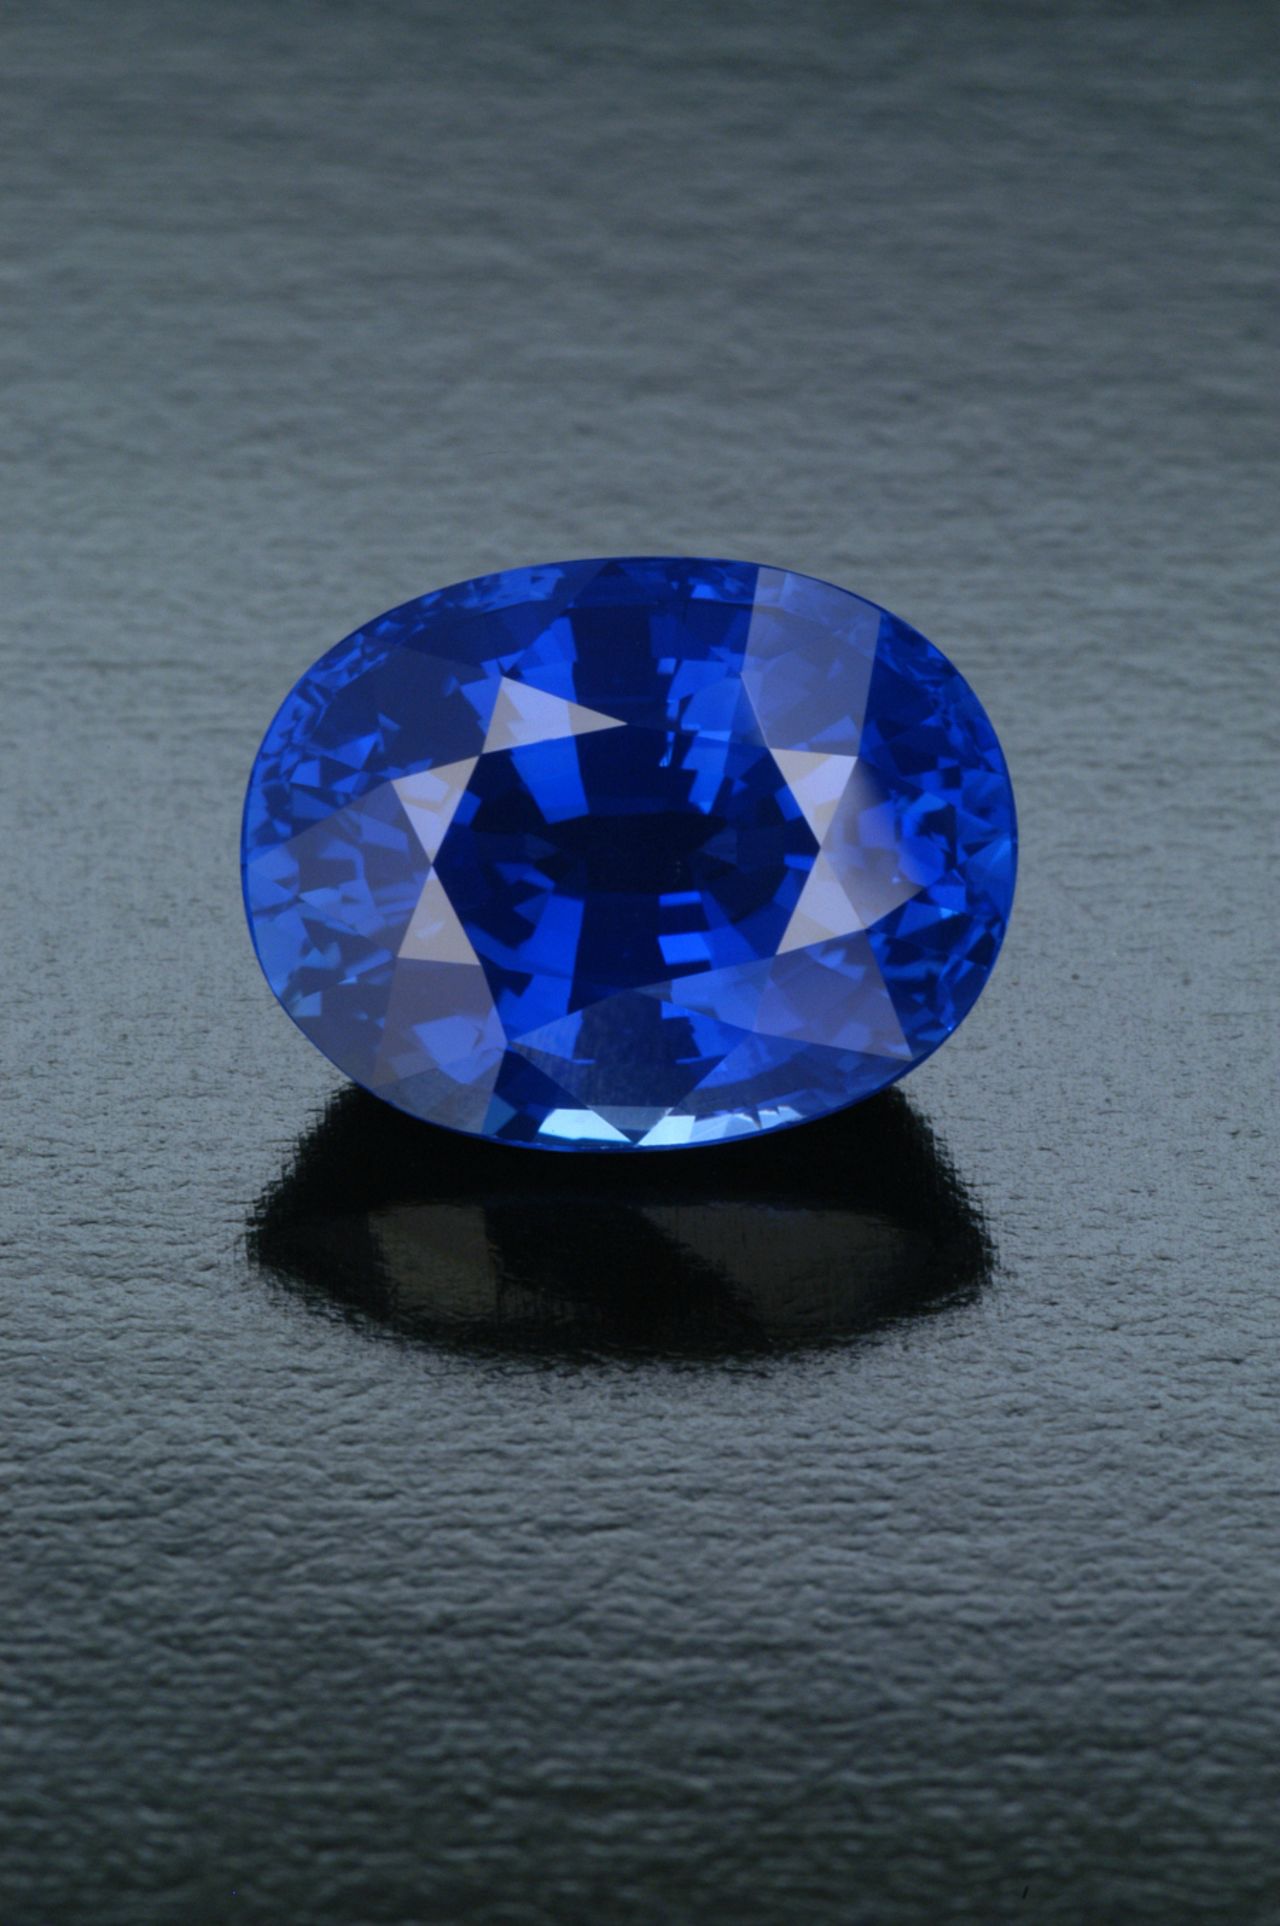 Like ruby, the sapphire is part of the conundrum family and comes in a variety of colors including violet, green, orange, pink and blue. It's traditionally sourced in Kashmir, India, with African sources including Nigeria and Madagascar, becoming the leading sources today, according to GIA.